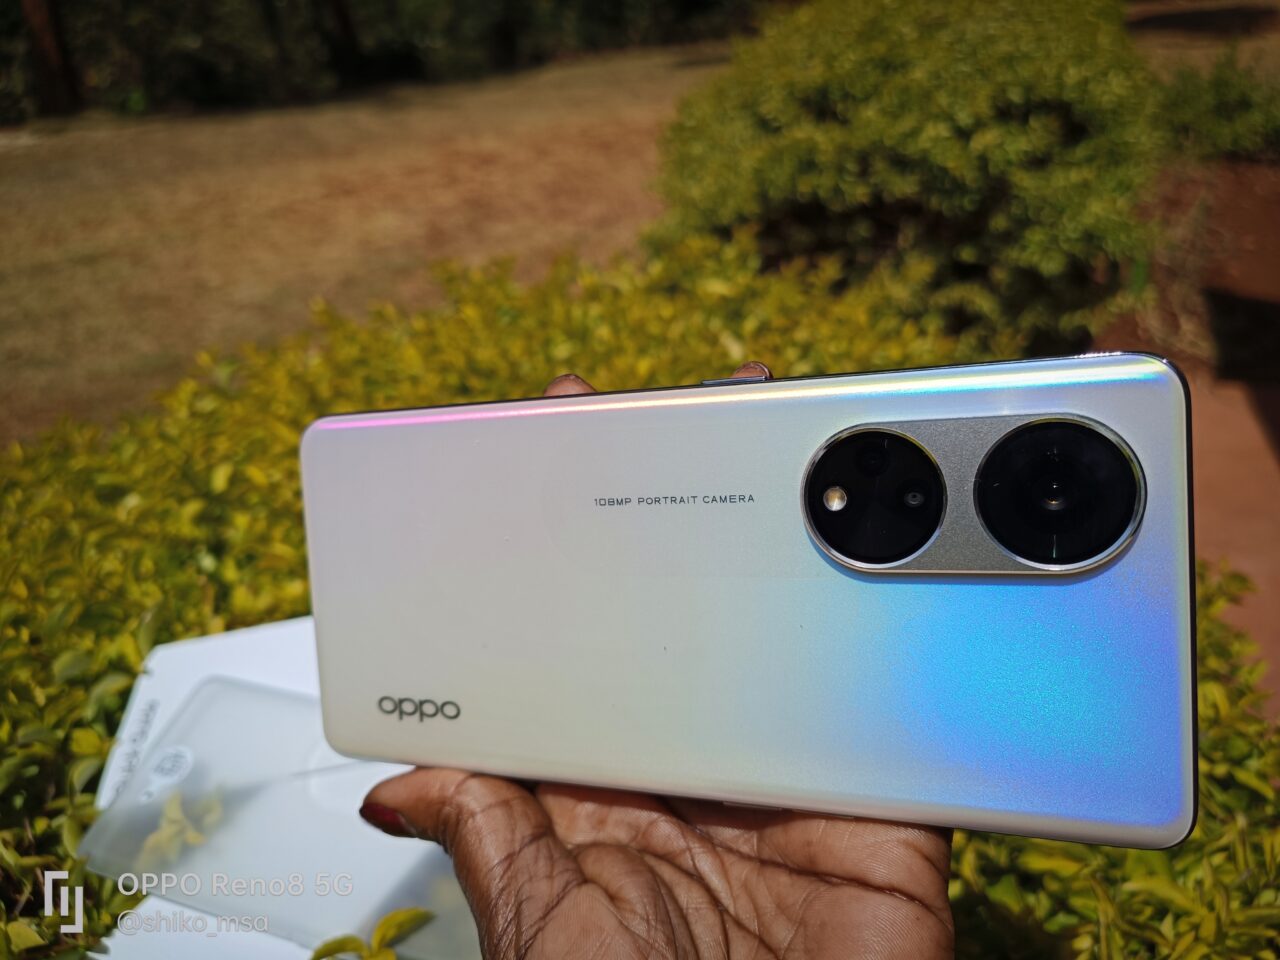 OPPO Reno 8T 5G Unboxing and First Impressions – TechMoran